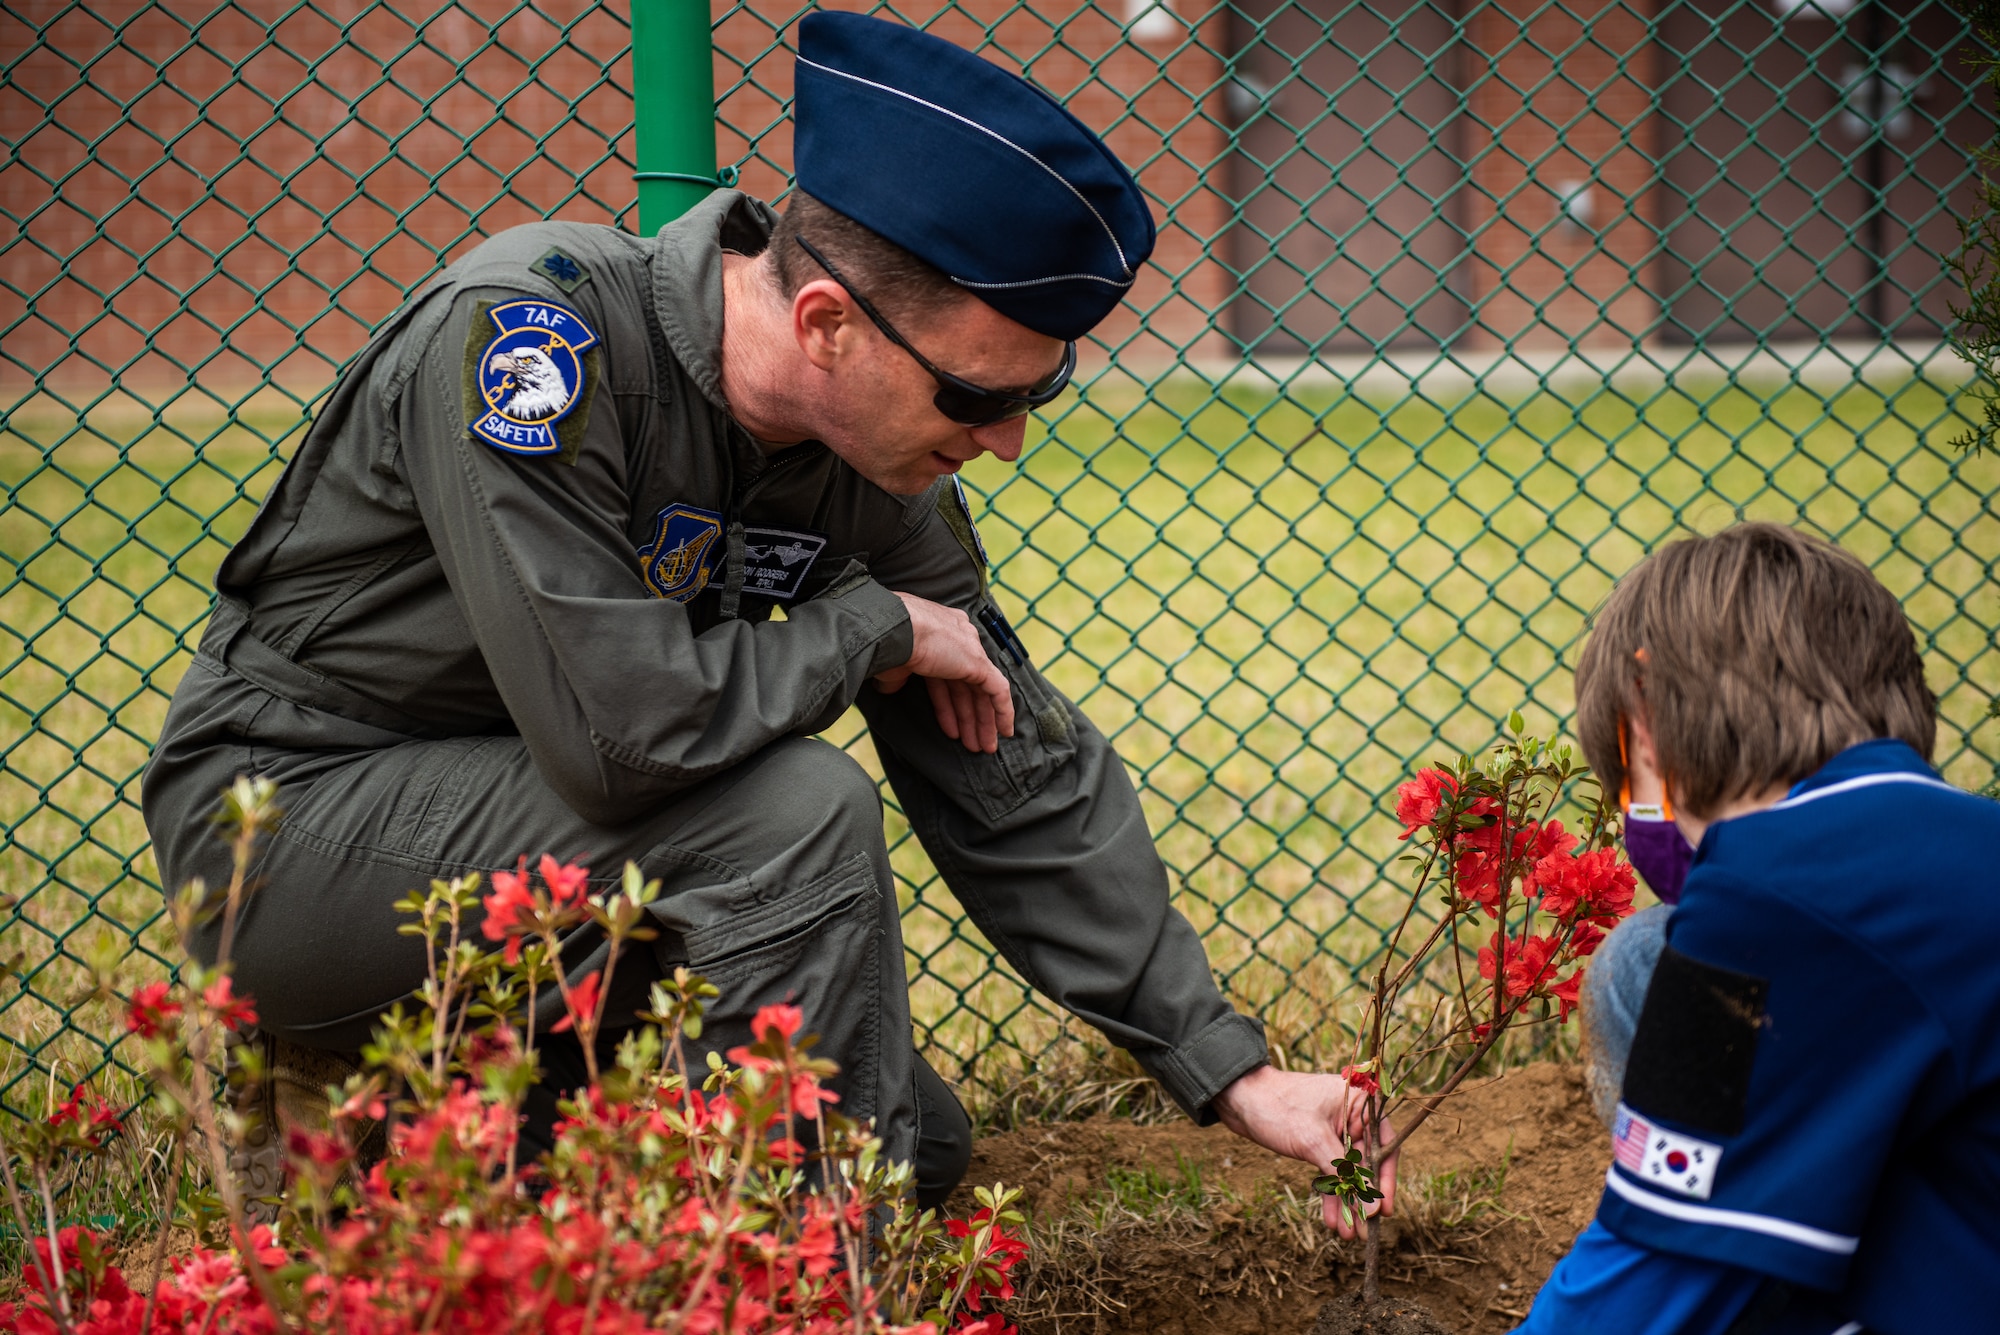 Lt. Col. Jason Rodgers, 7th Air Force Safety Office chief of safety, helps students plant flowers in front of Osan Elementary School, 22 April, 2022 at Osan Air Base, Republic of Korea.